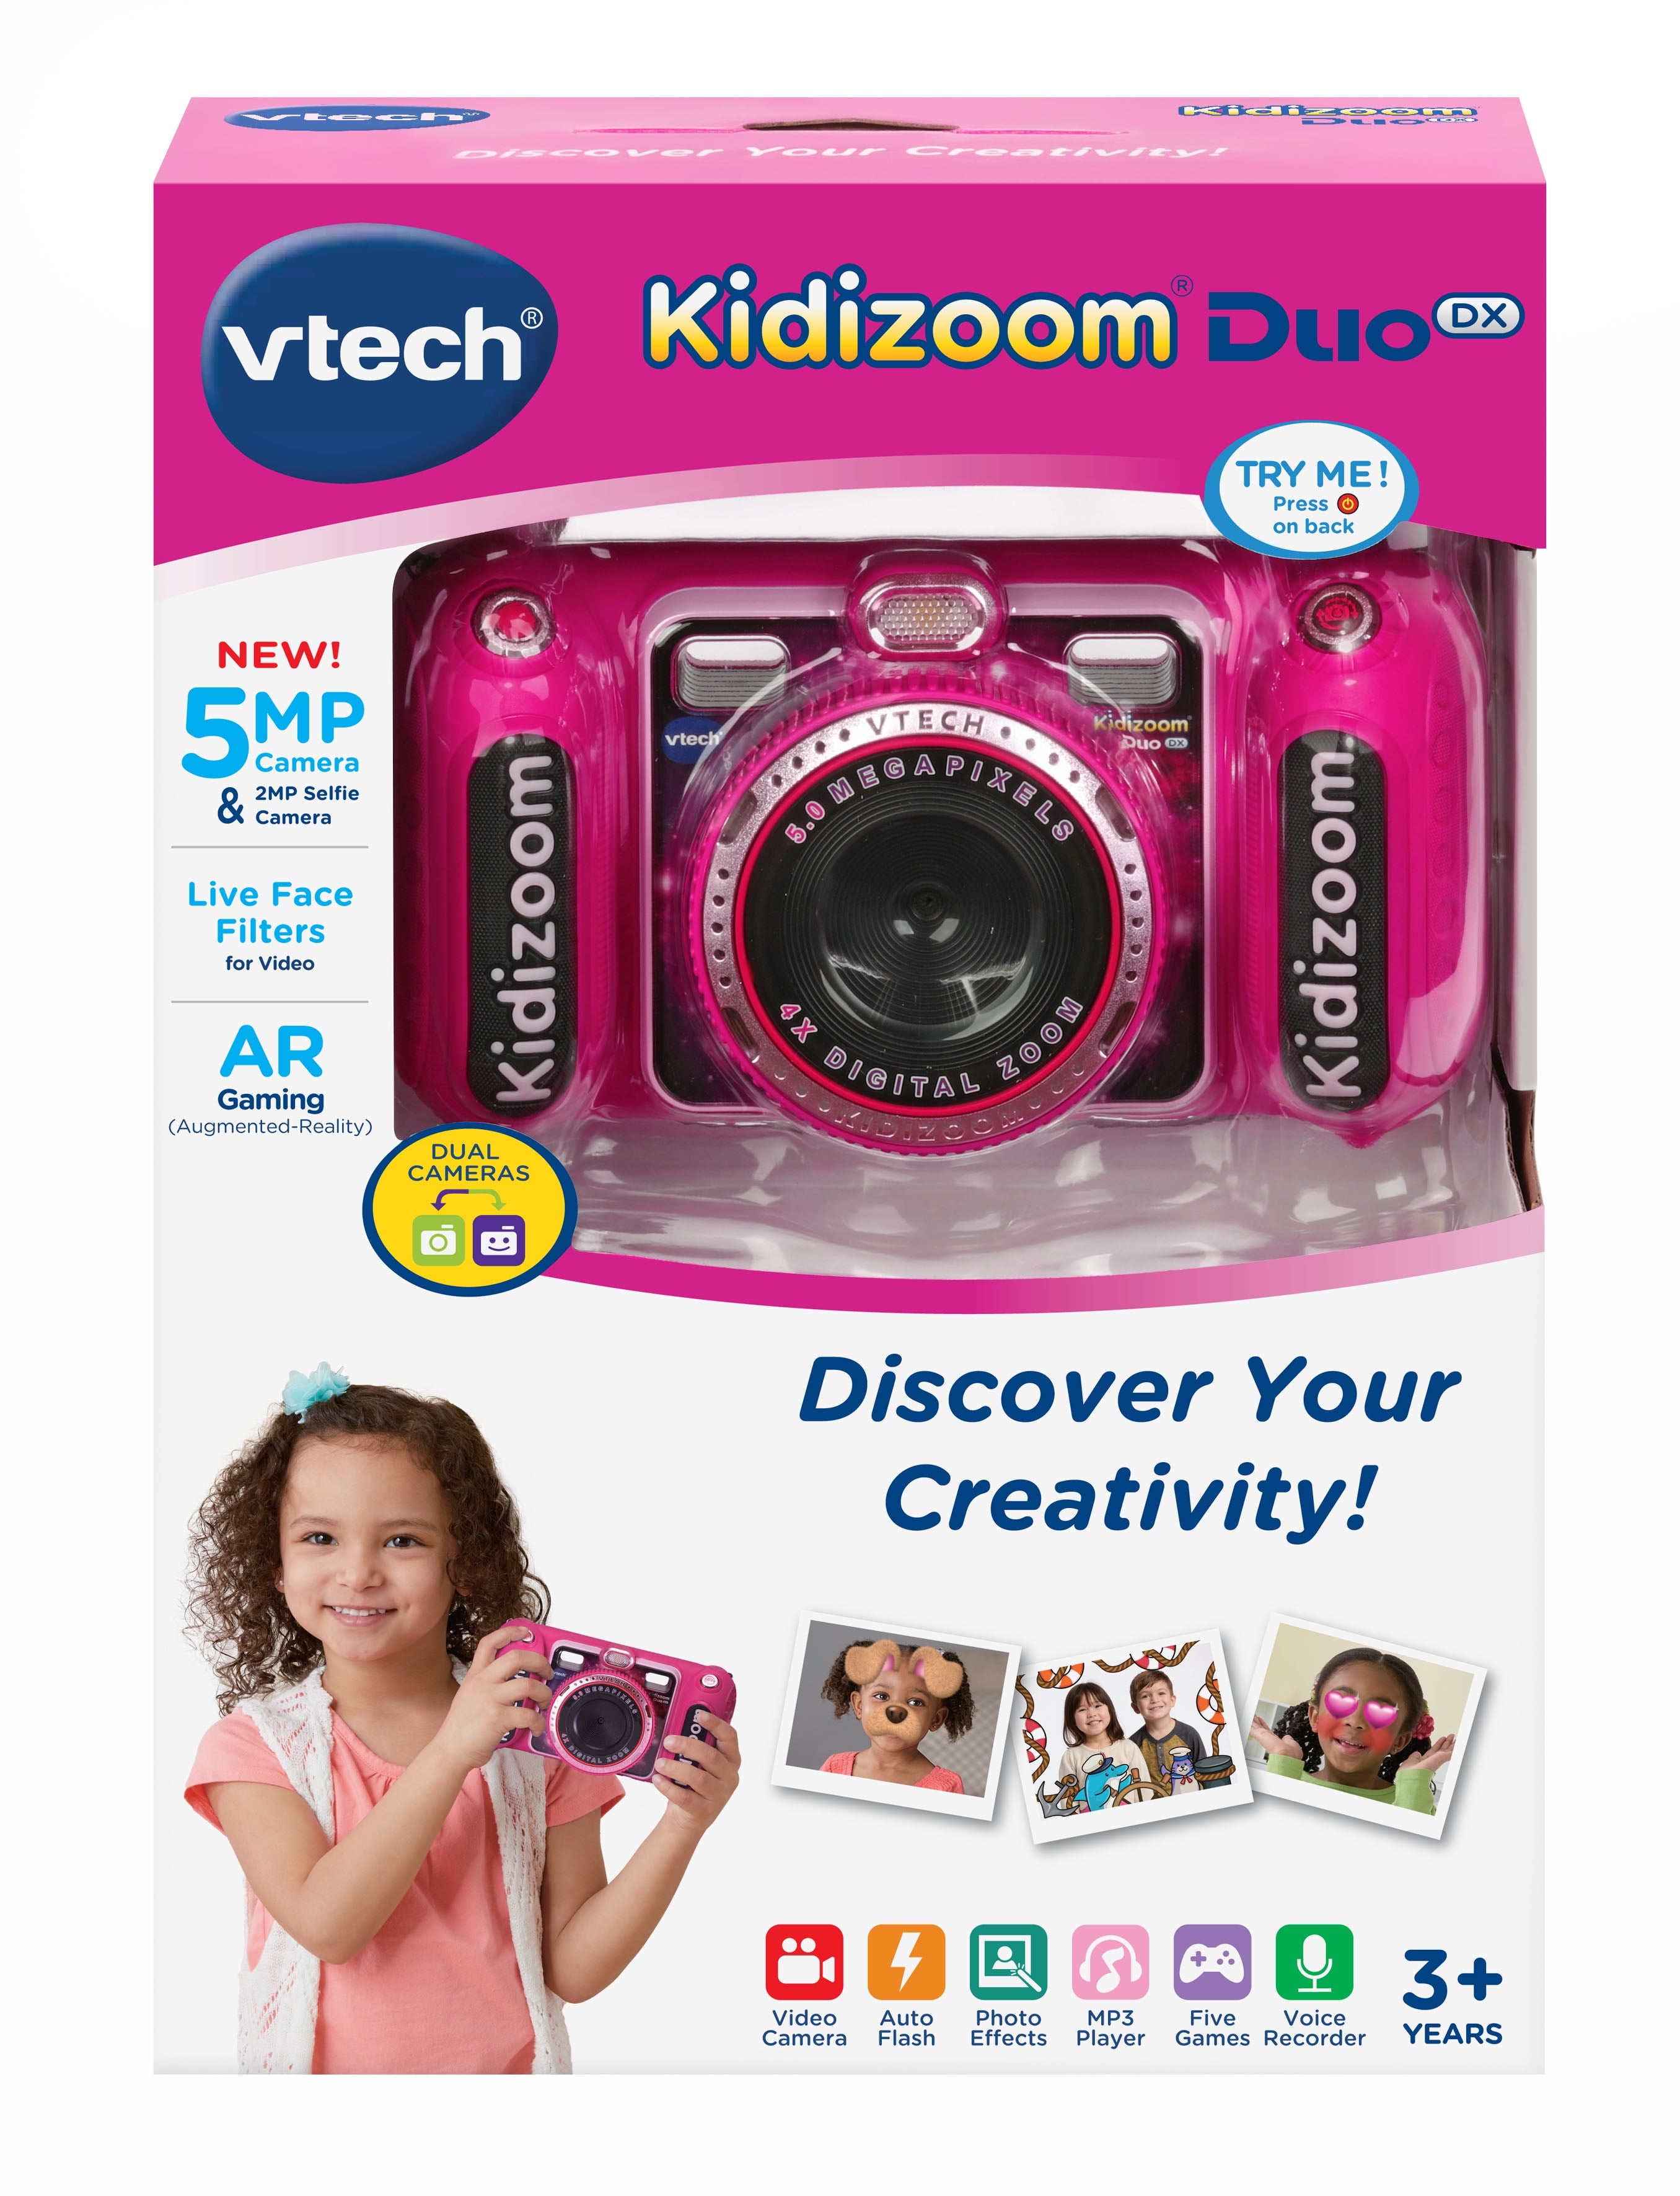 VTech Kidizoom Duo FX - Pink